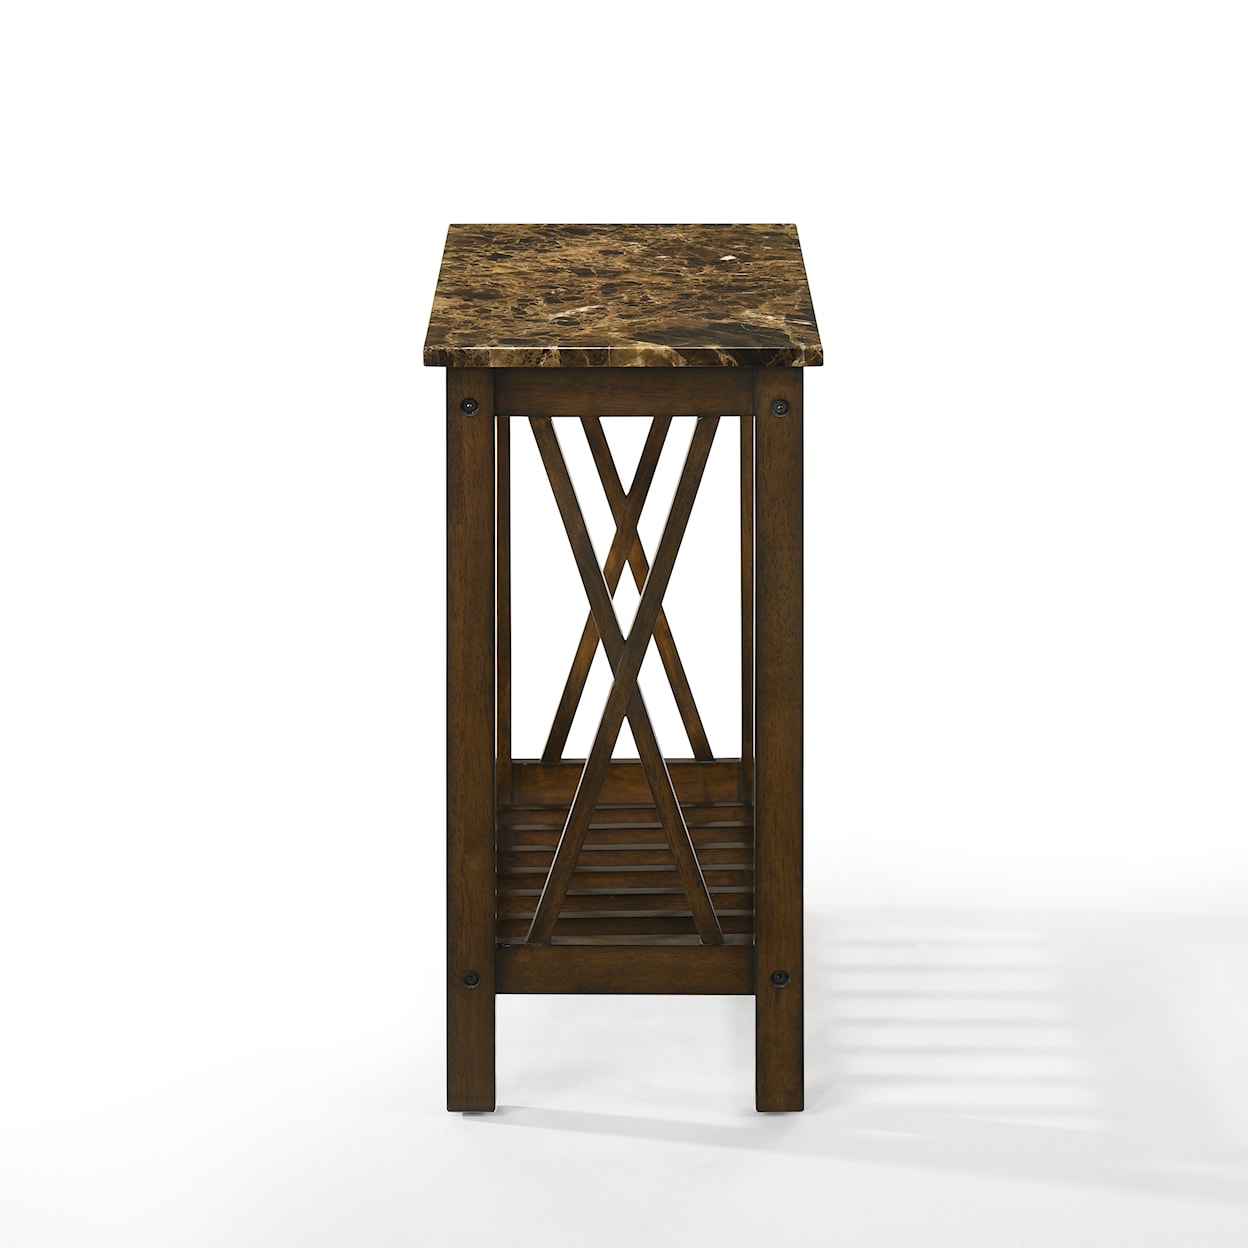 New Classic Eden End Table